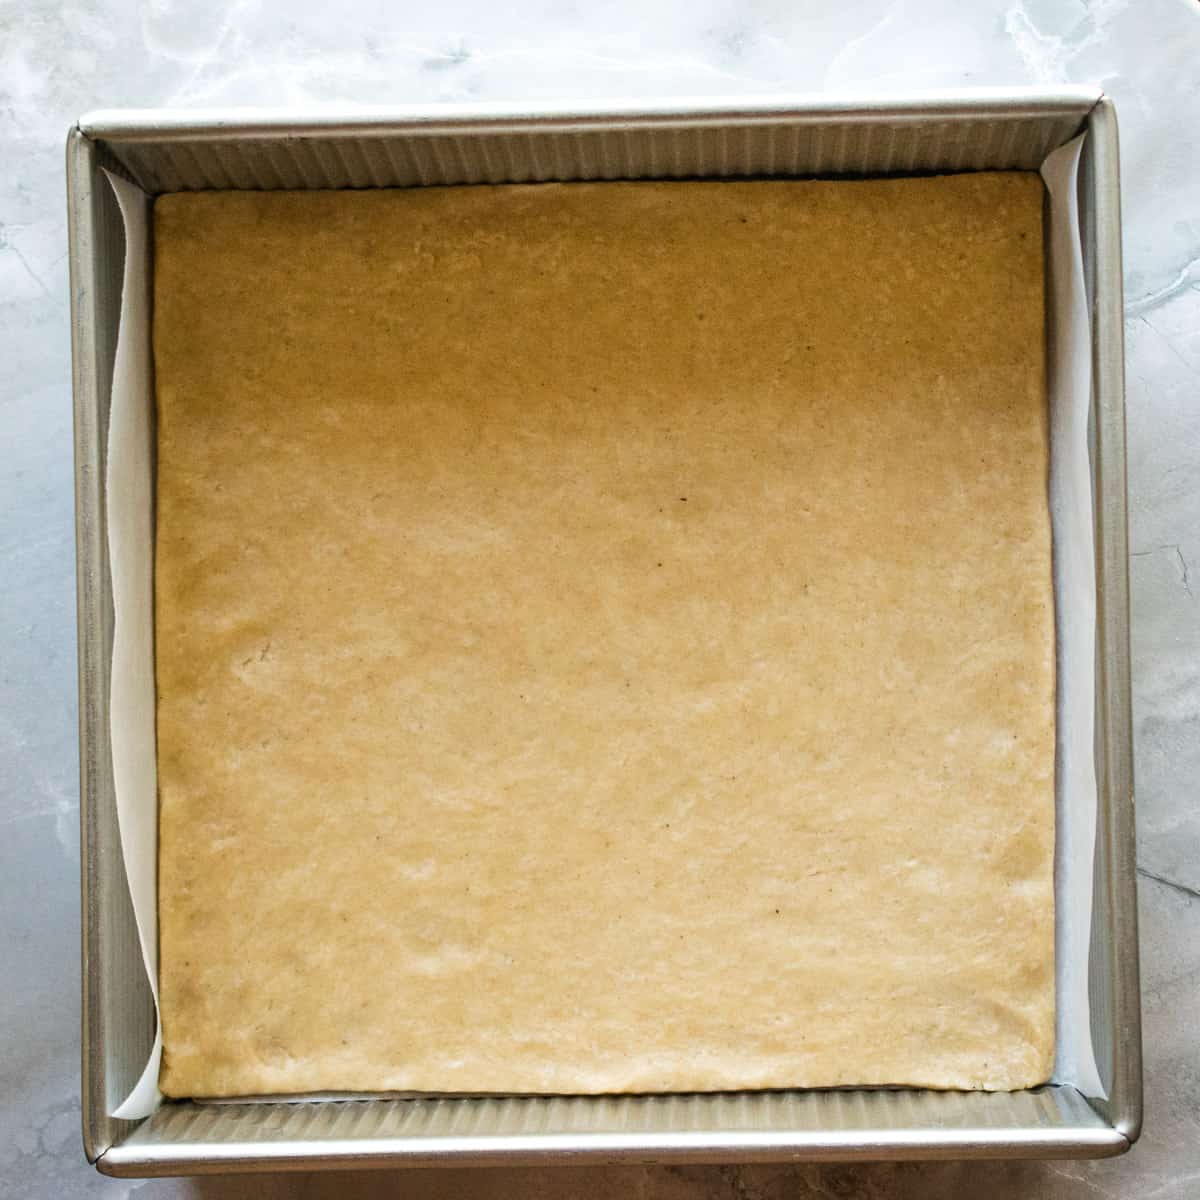 Cinnamon crust dough pressed into the bottom of a square pan. 